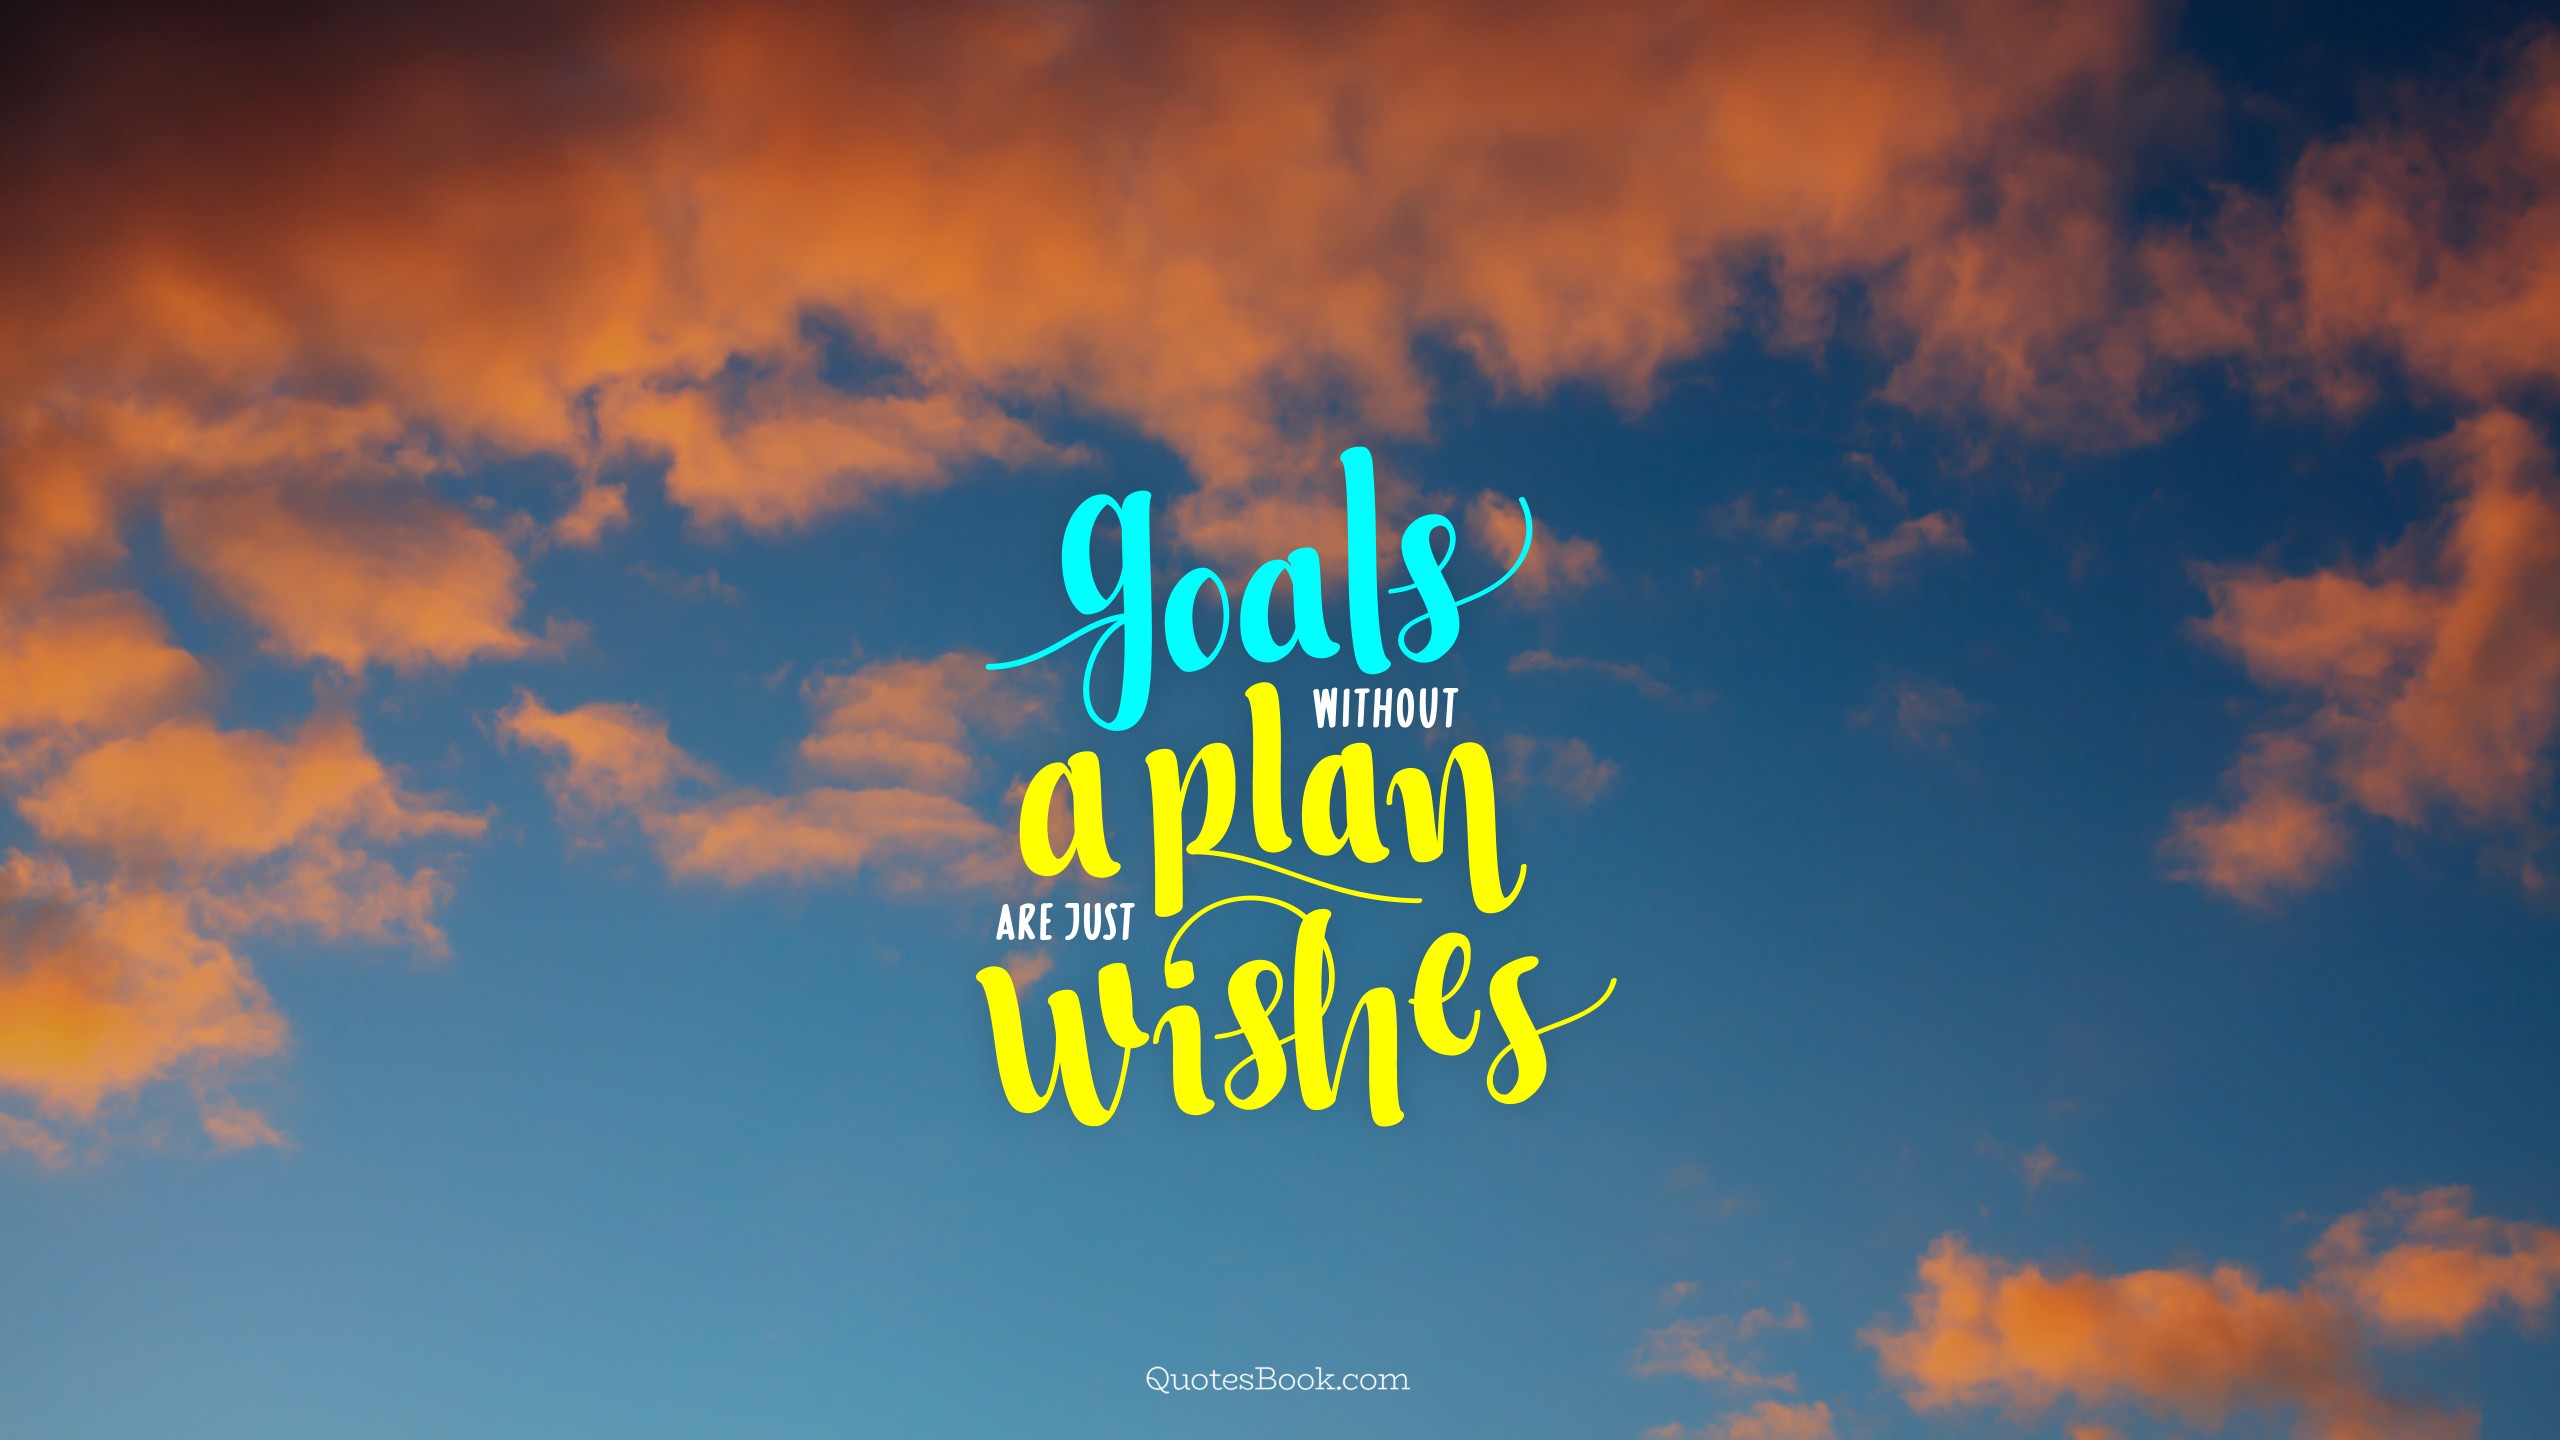 Goal Without A Plan Is Just A Wish Wallp - 2560x1440 Wallpaper 